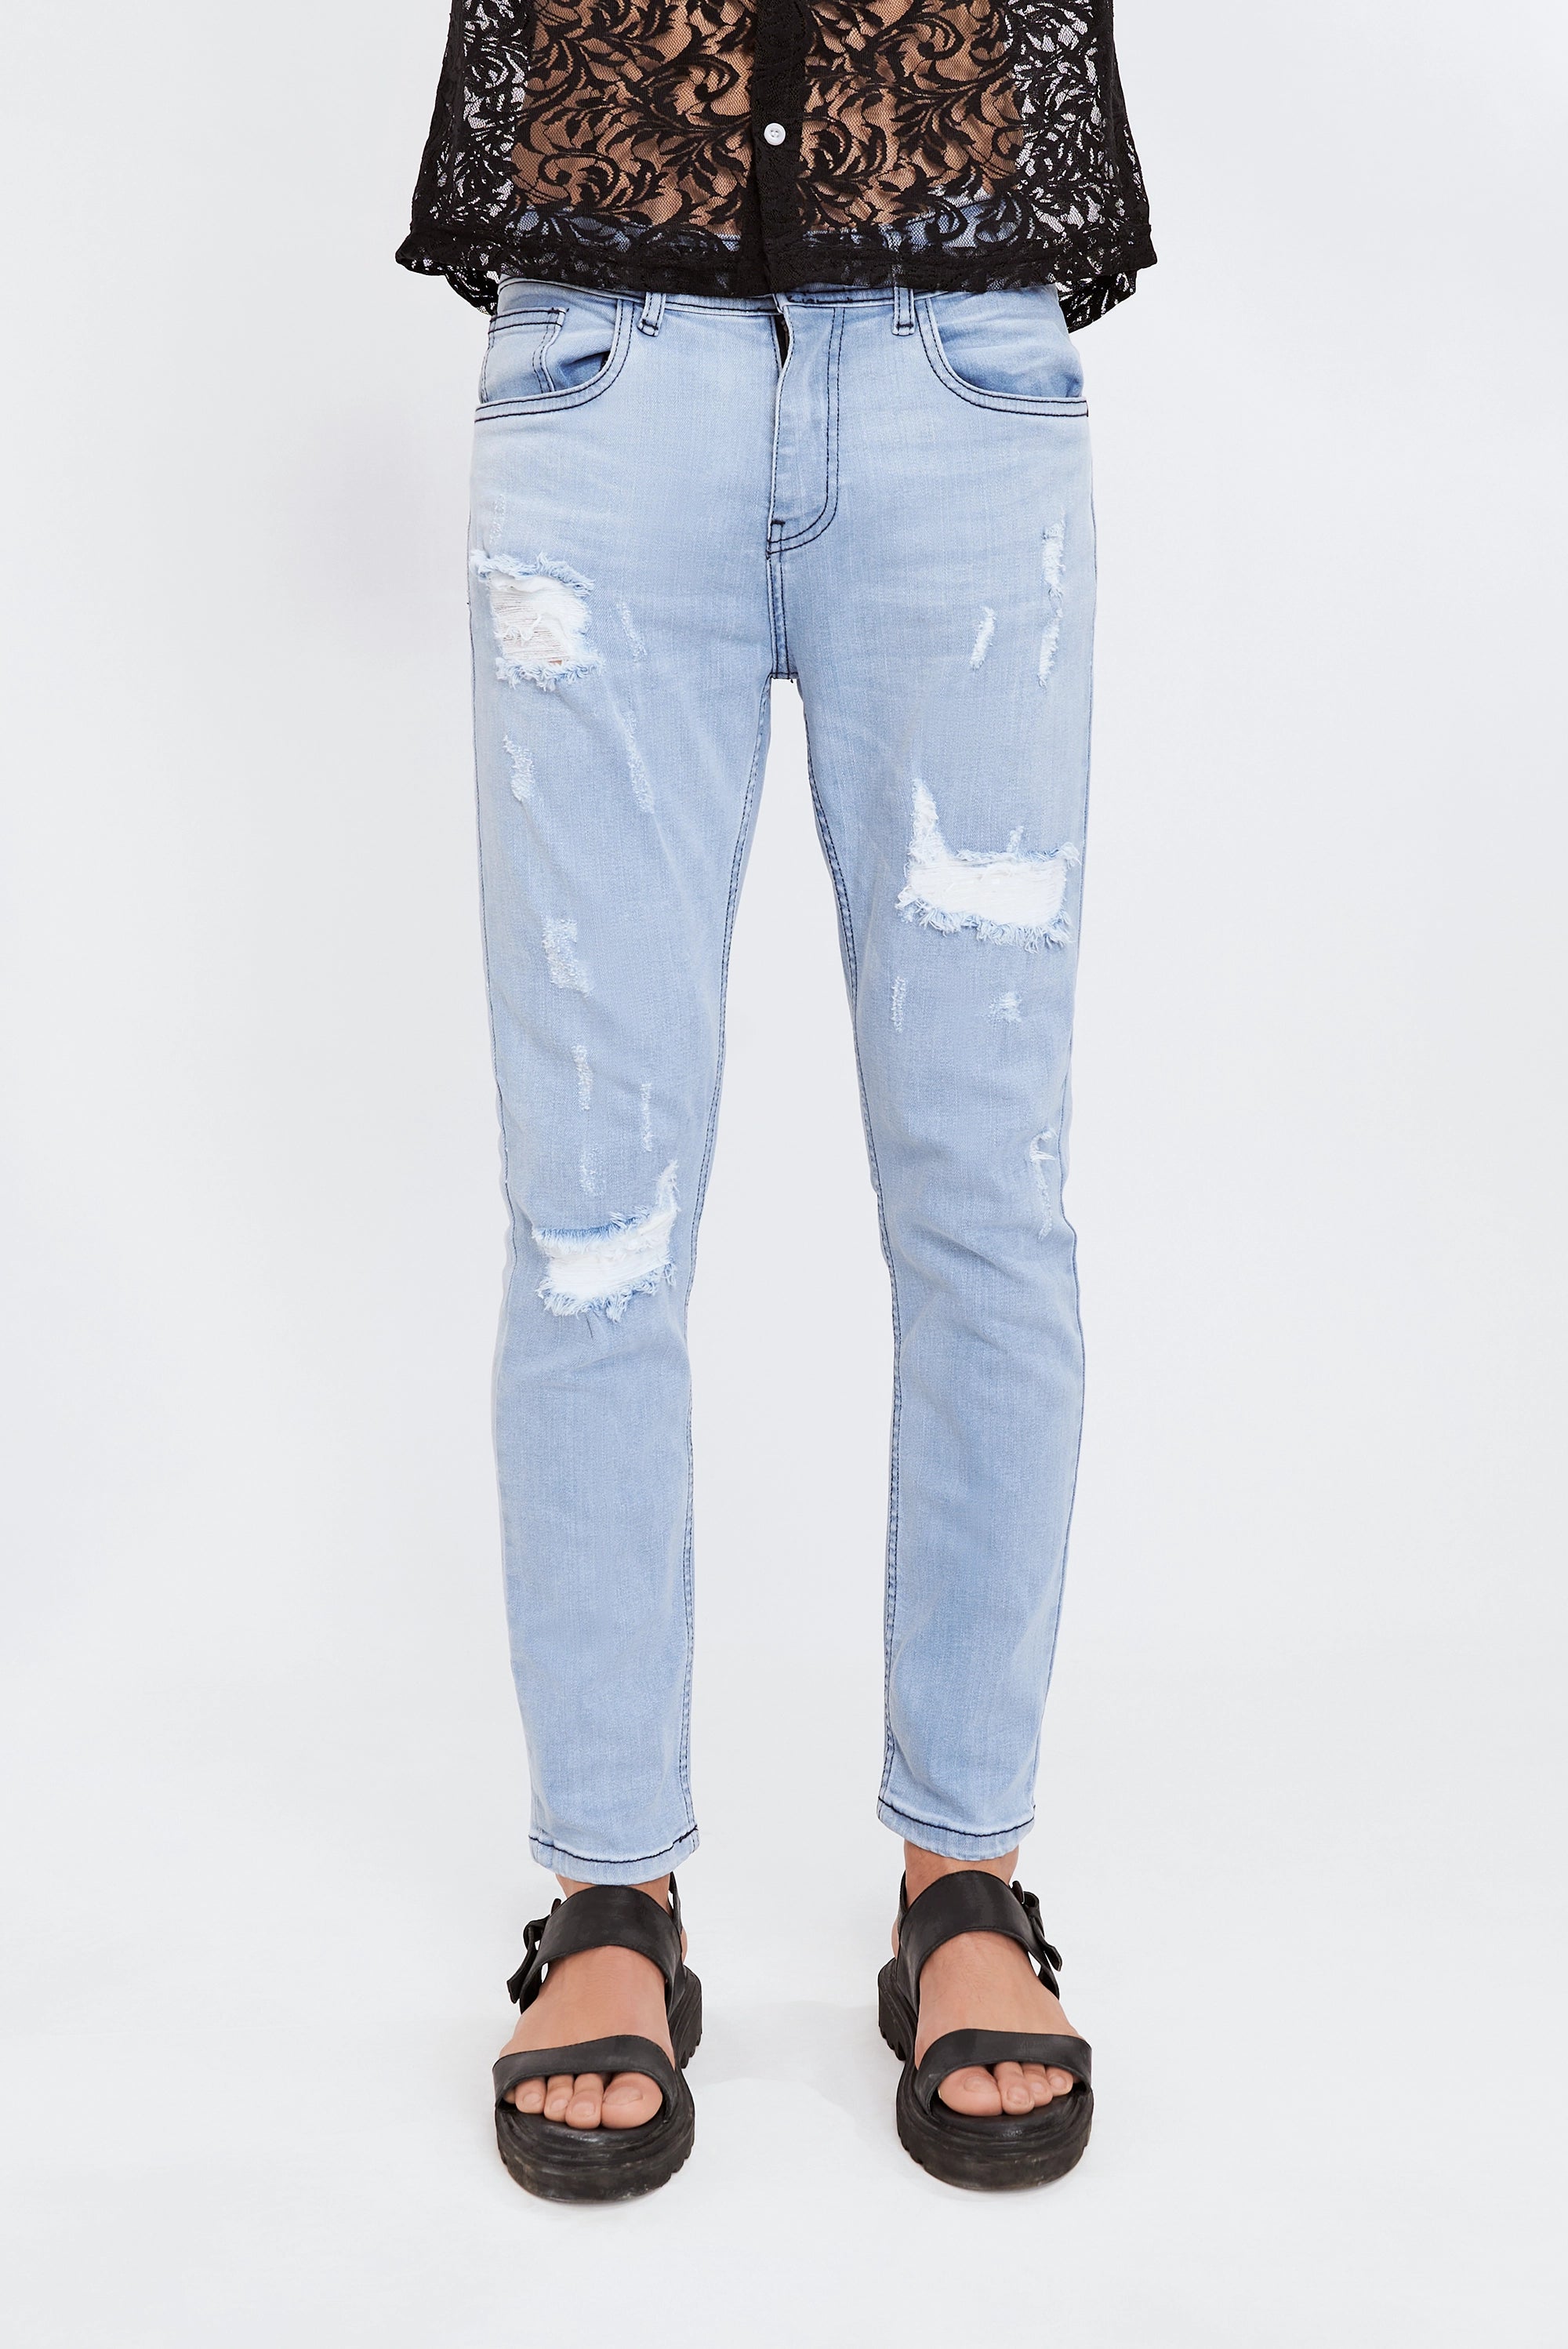 Men's Ripped Tapered Fit Sky Blue Jeans